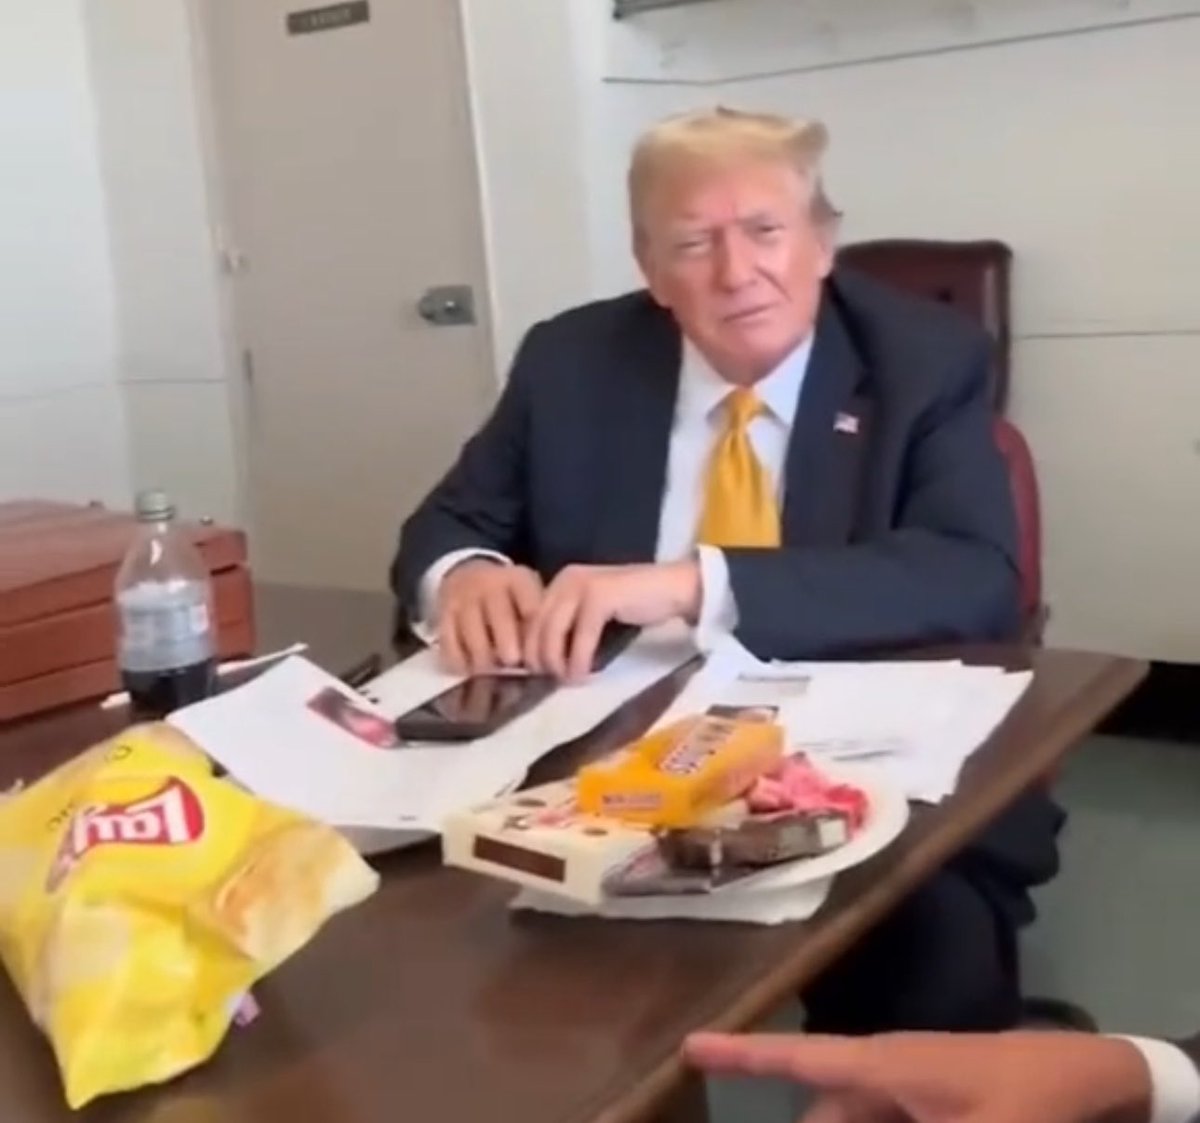 A picture of Trump from the courthouse surrounded by junk food: a bag of lays, a Diet Coke, and boxes of candy including Milk Duds, Whoppers, and others.